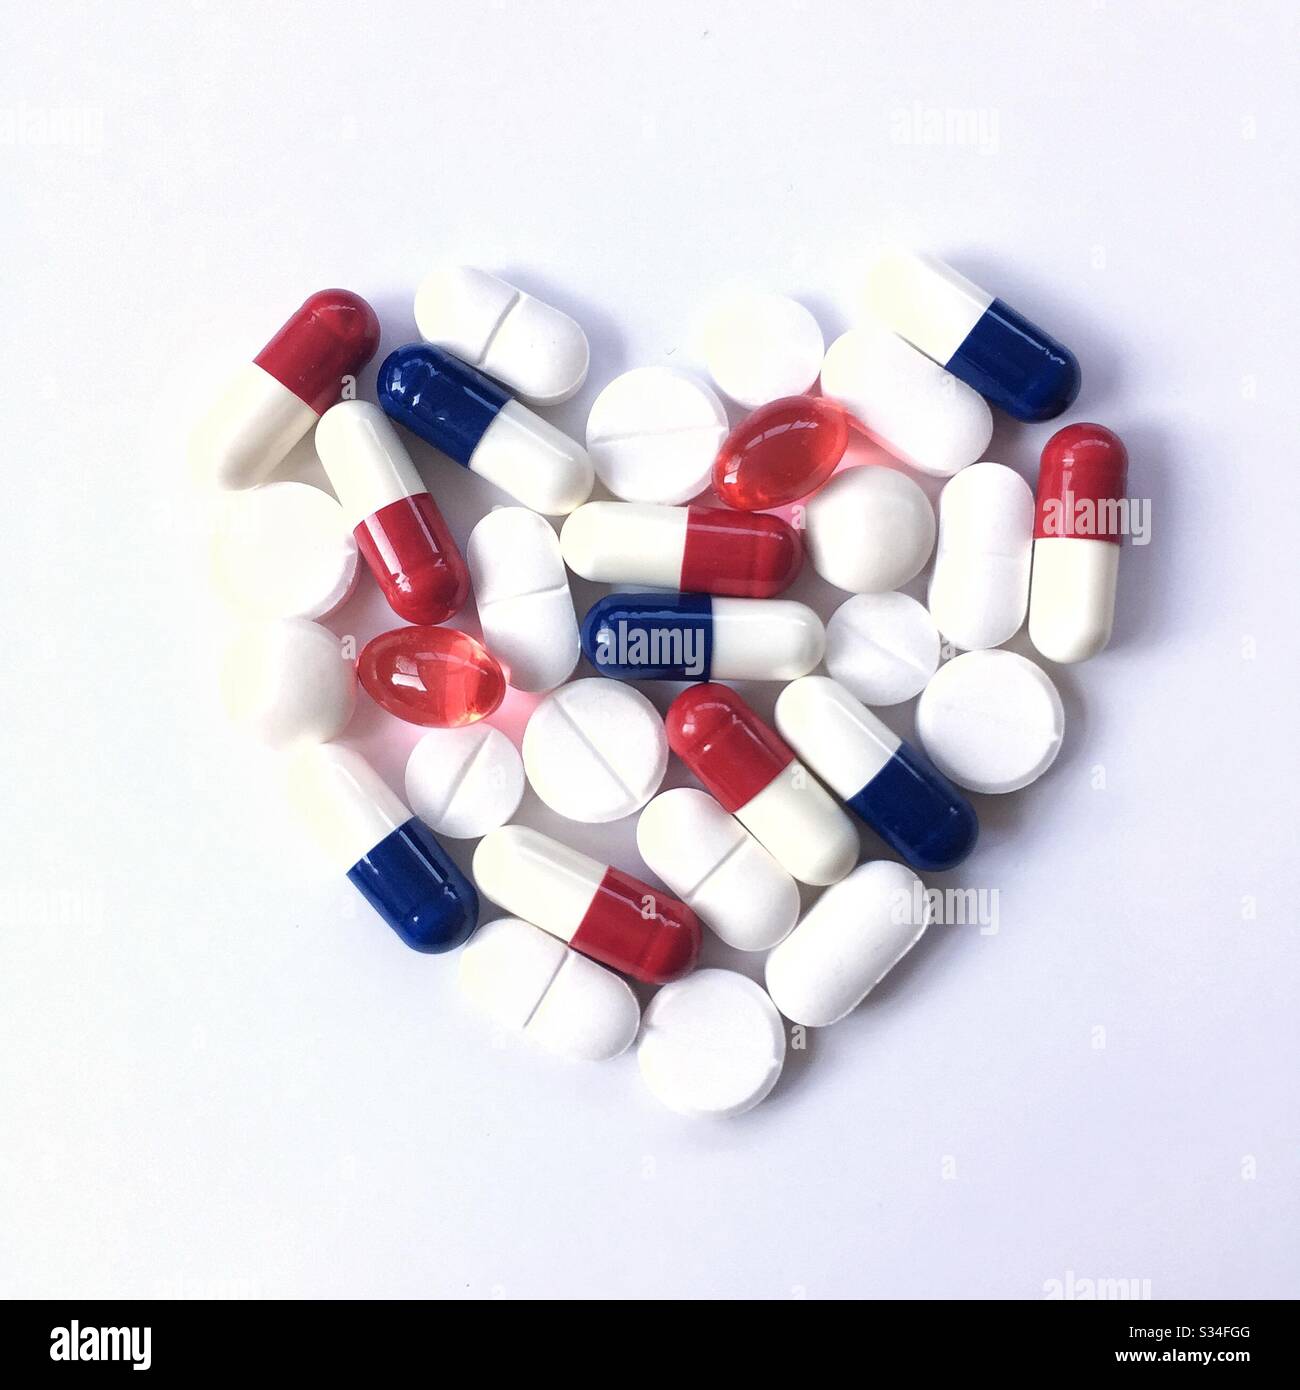 A heart shape made from prescription drugs such as paracetamol, pills and tablets on a white background Stock Photo